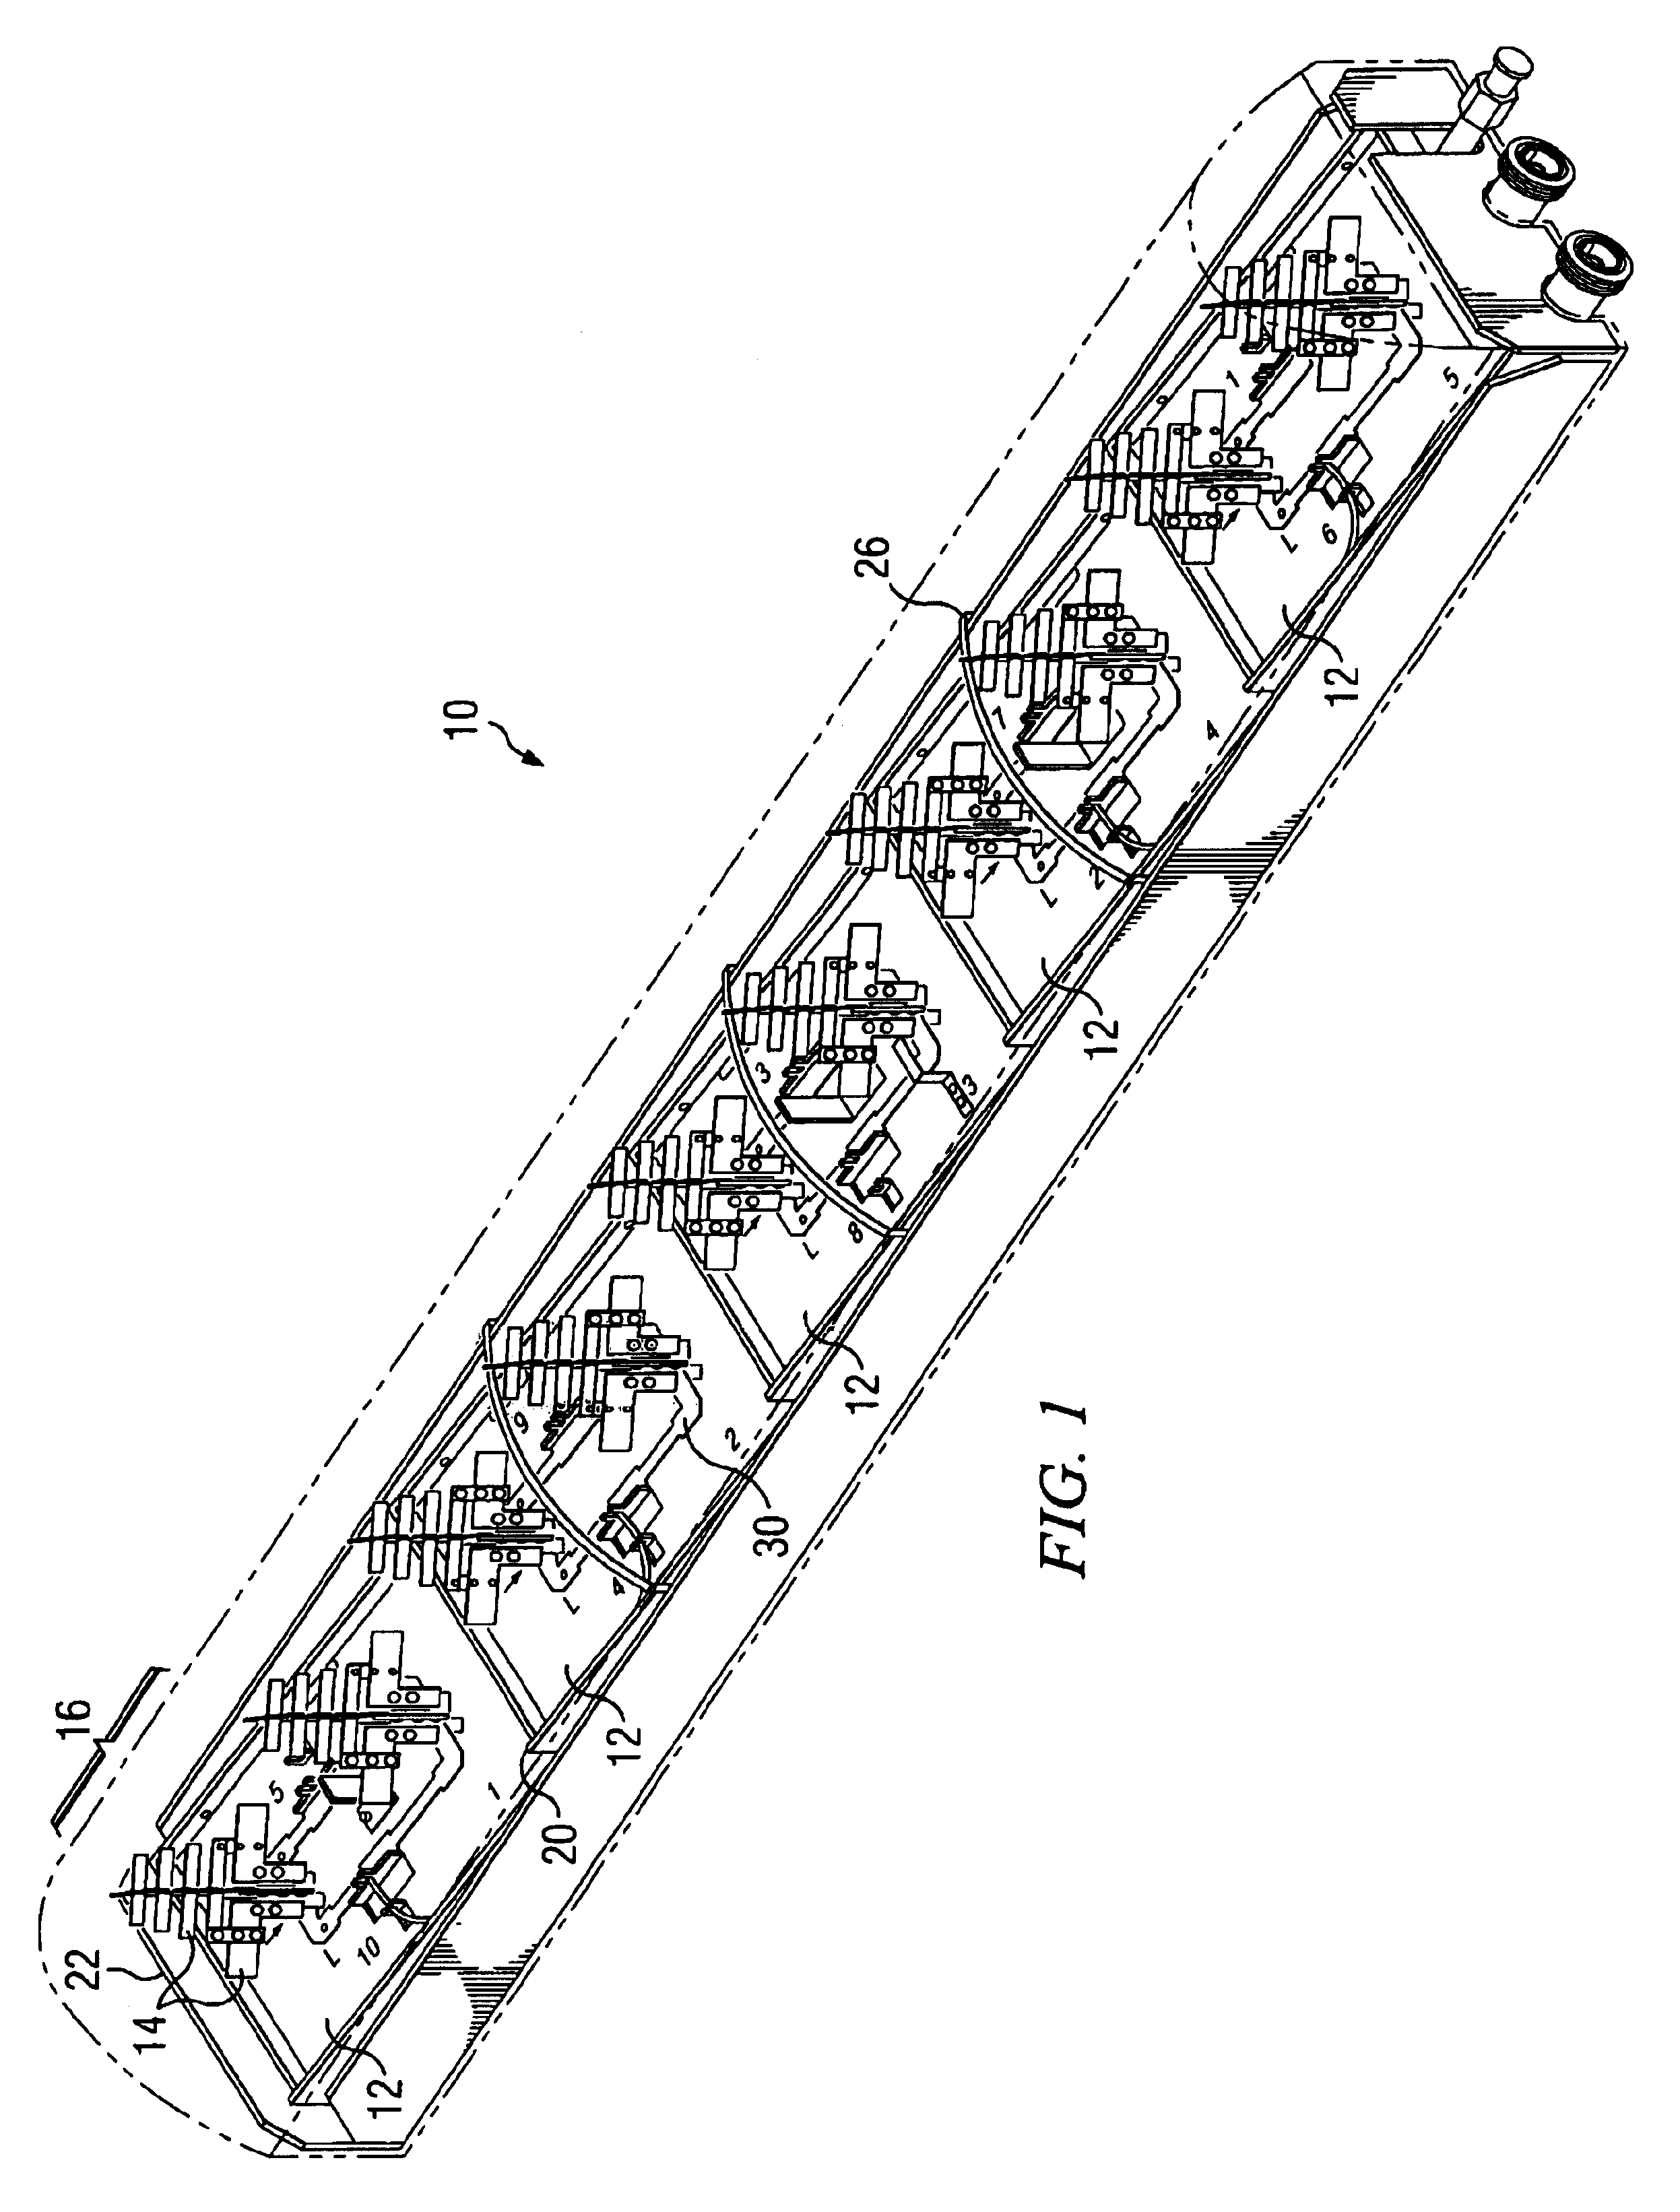 Wideband dual polarized base station antenna offering optimized horizontal beam radiation patterns and variable vertical beam tilt